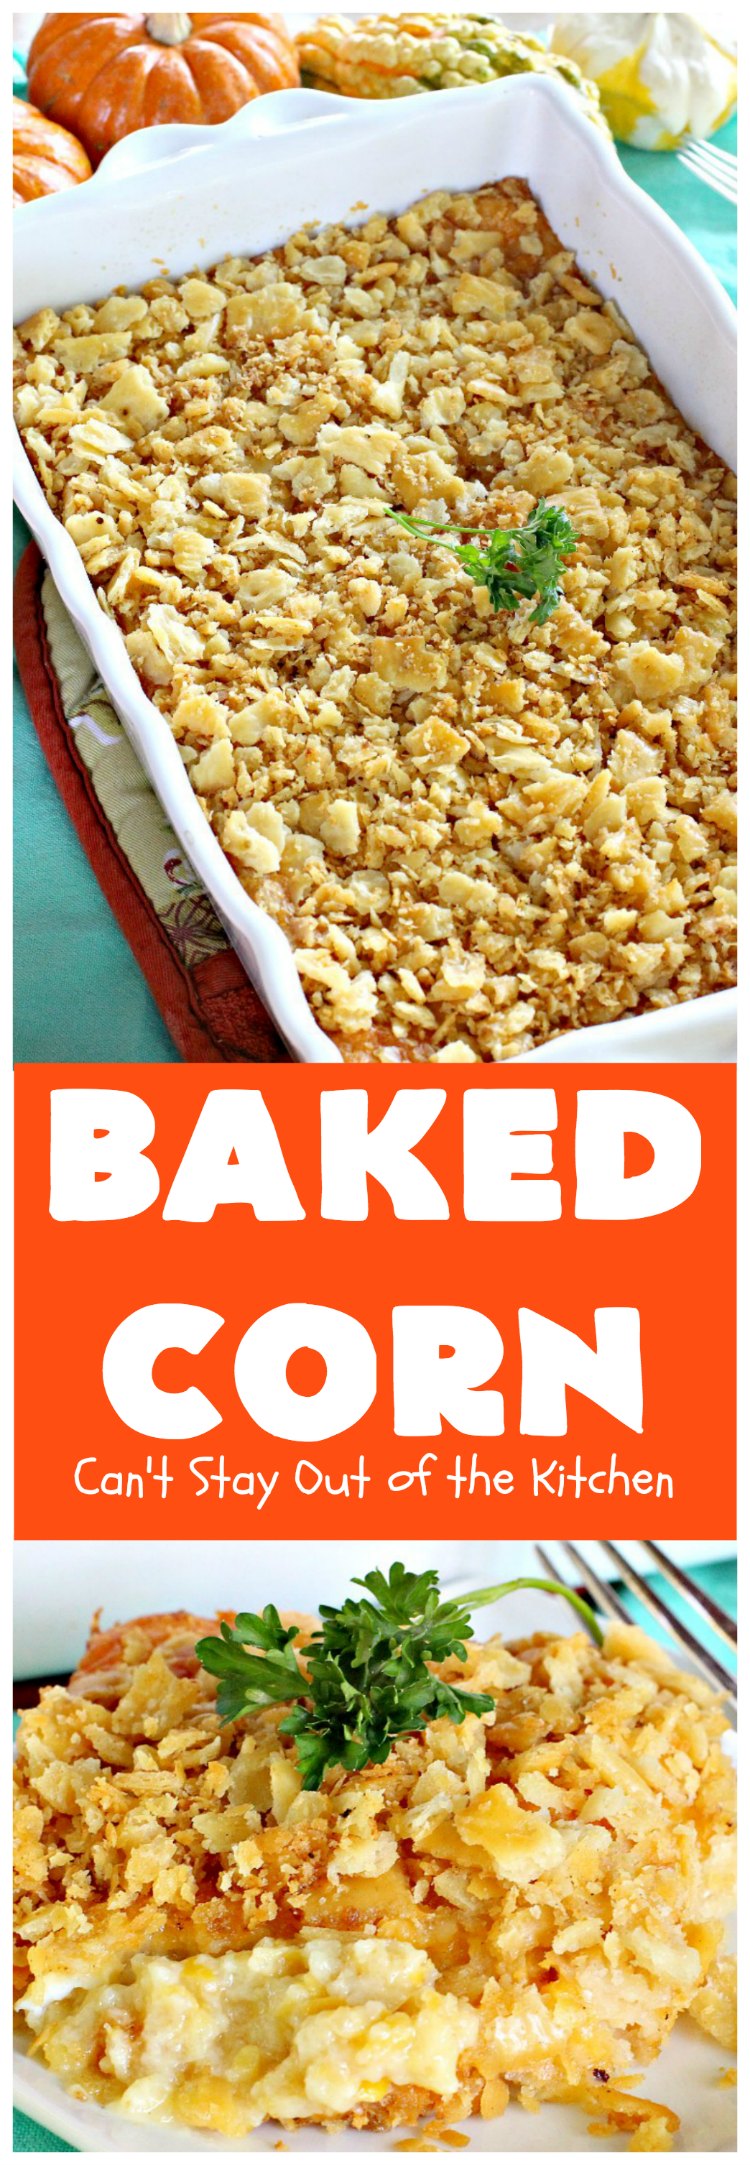 Baked Corn | Can't Stay Out of the Kitchen